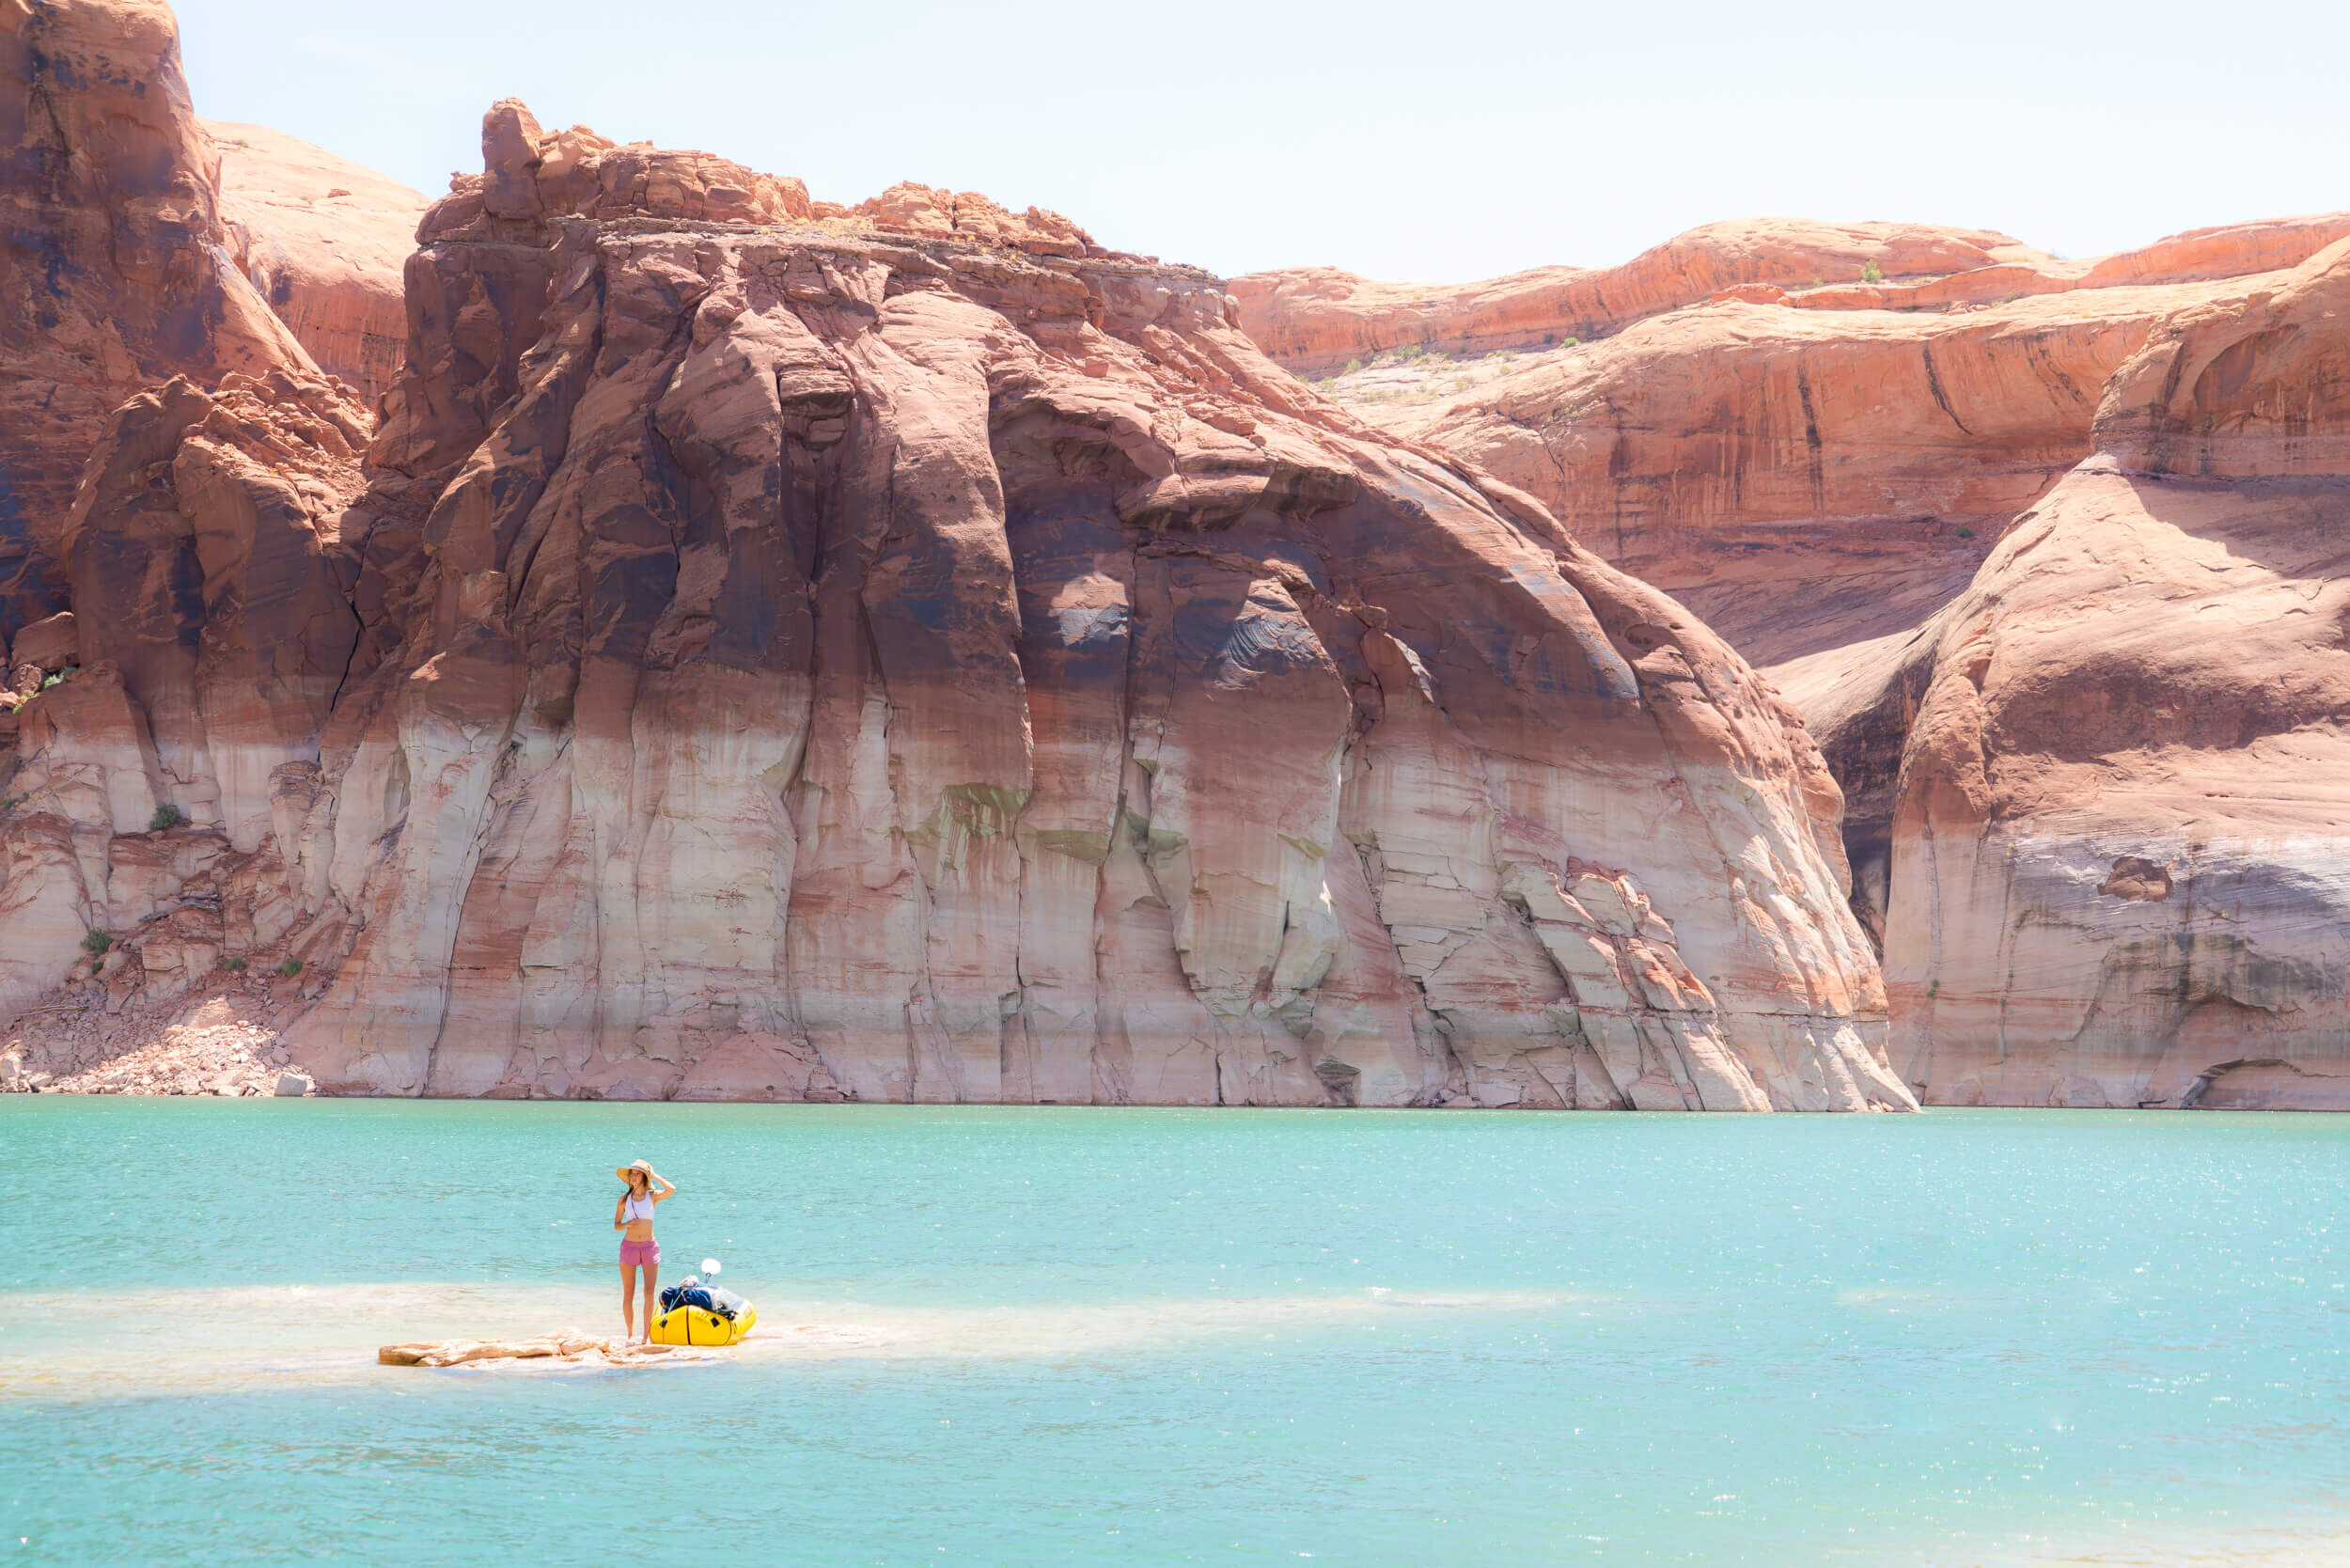 Taking a break on our first day packrafting Lake Powell.